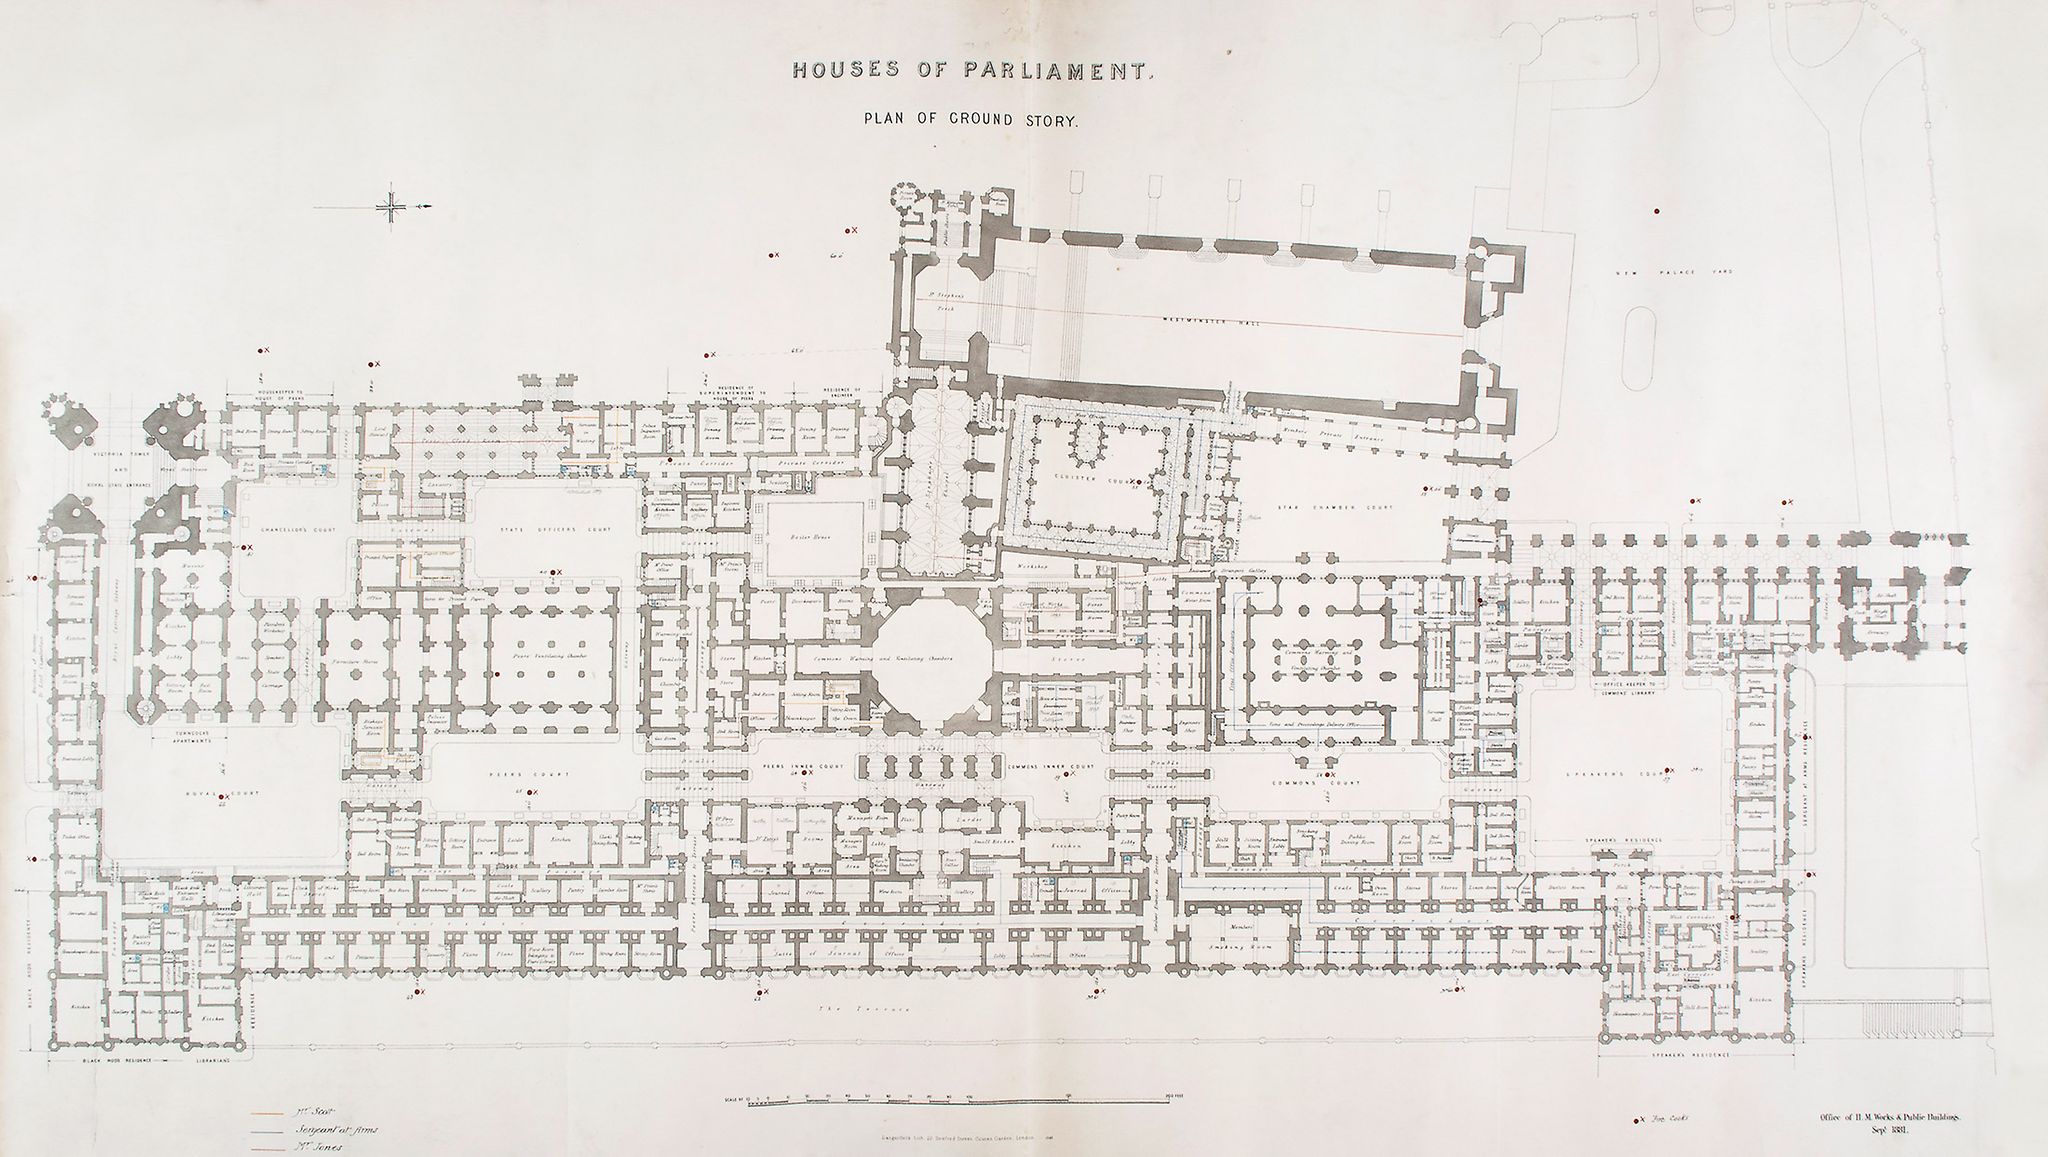 Office of H. M. Works and Public buildings - Houses of Parliament, plan of ground story